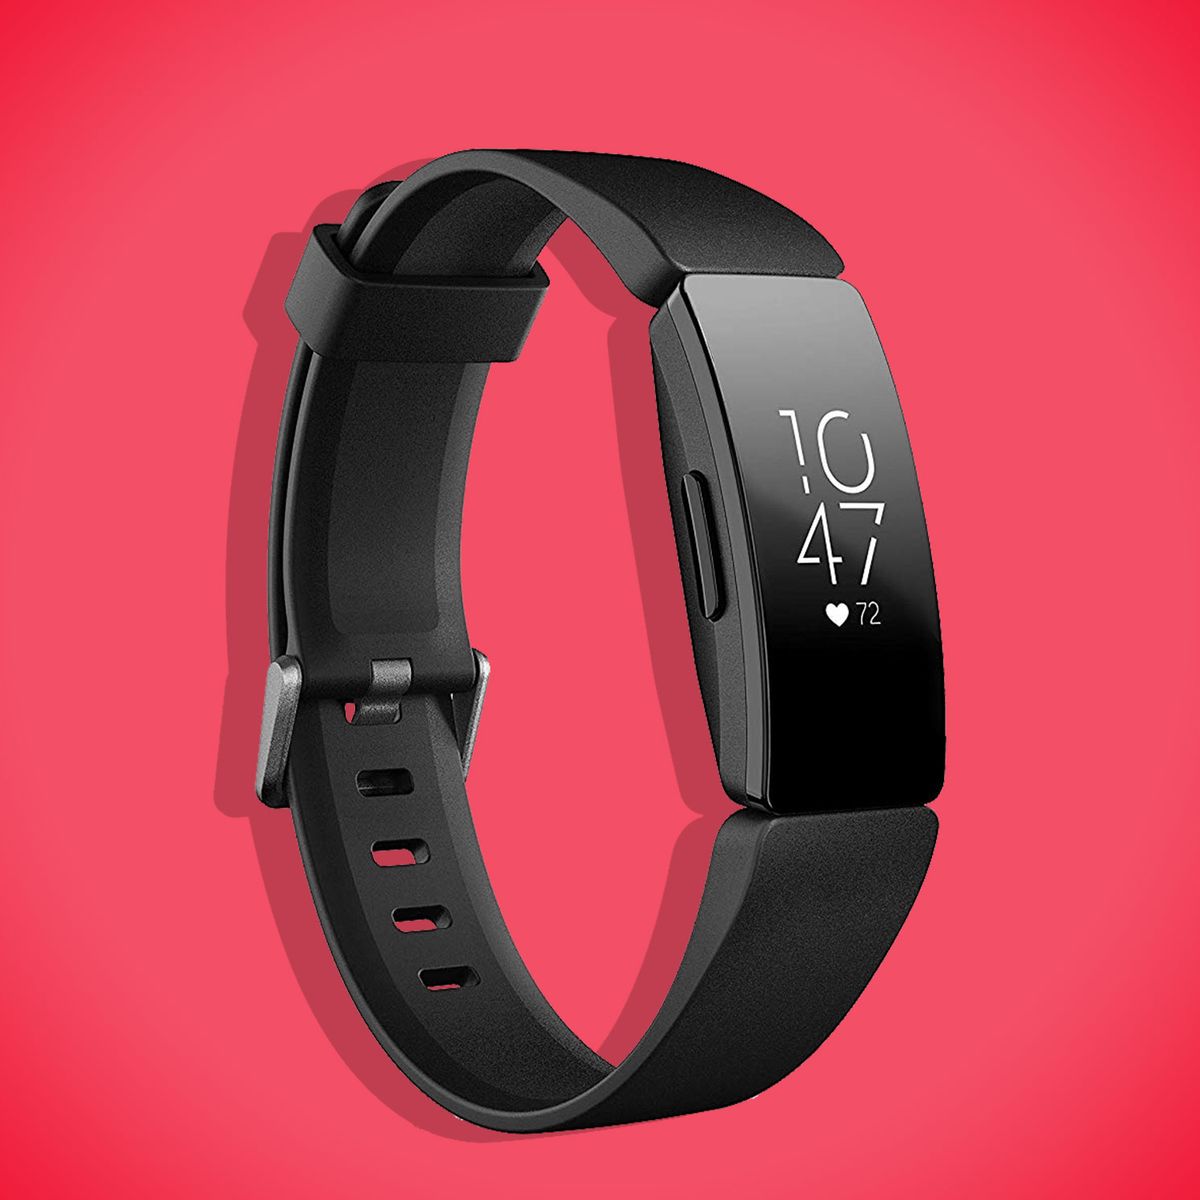 which is the cheapest fitbit